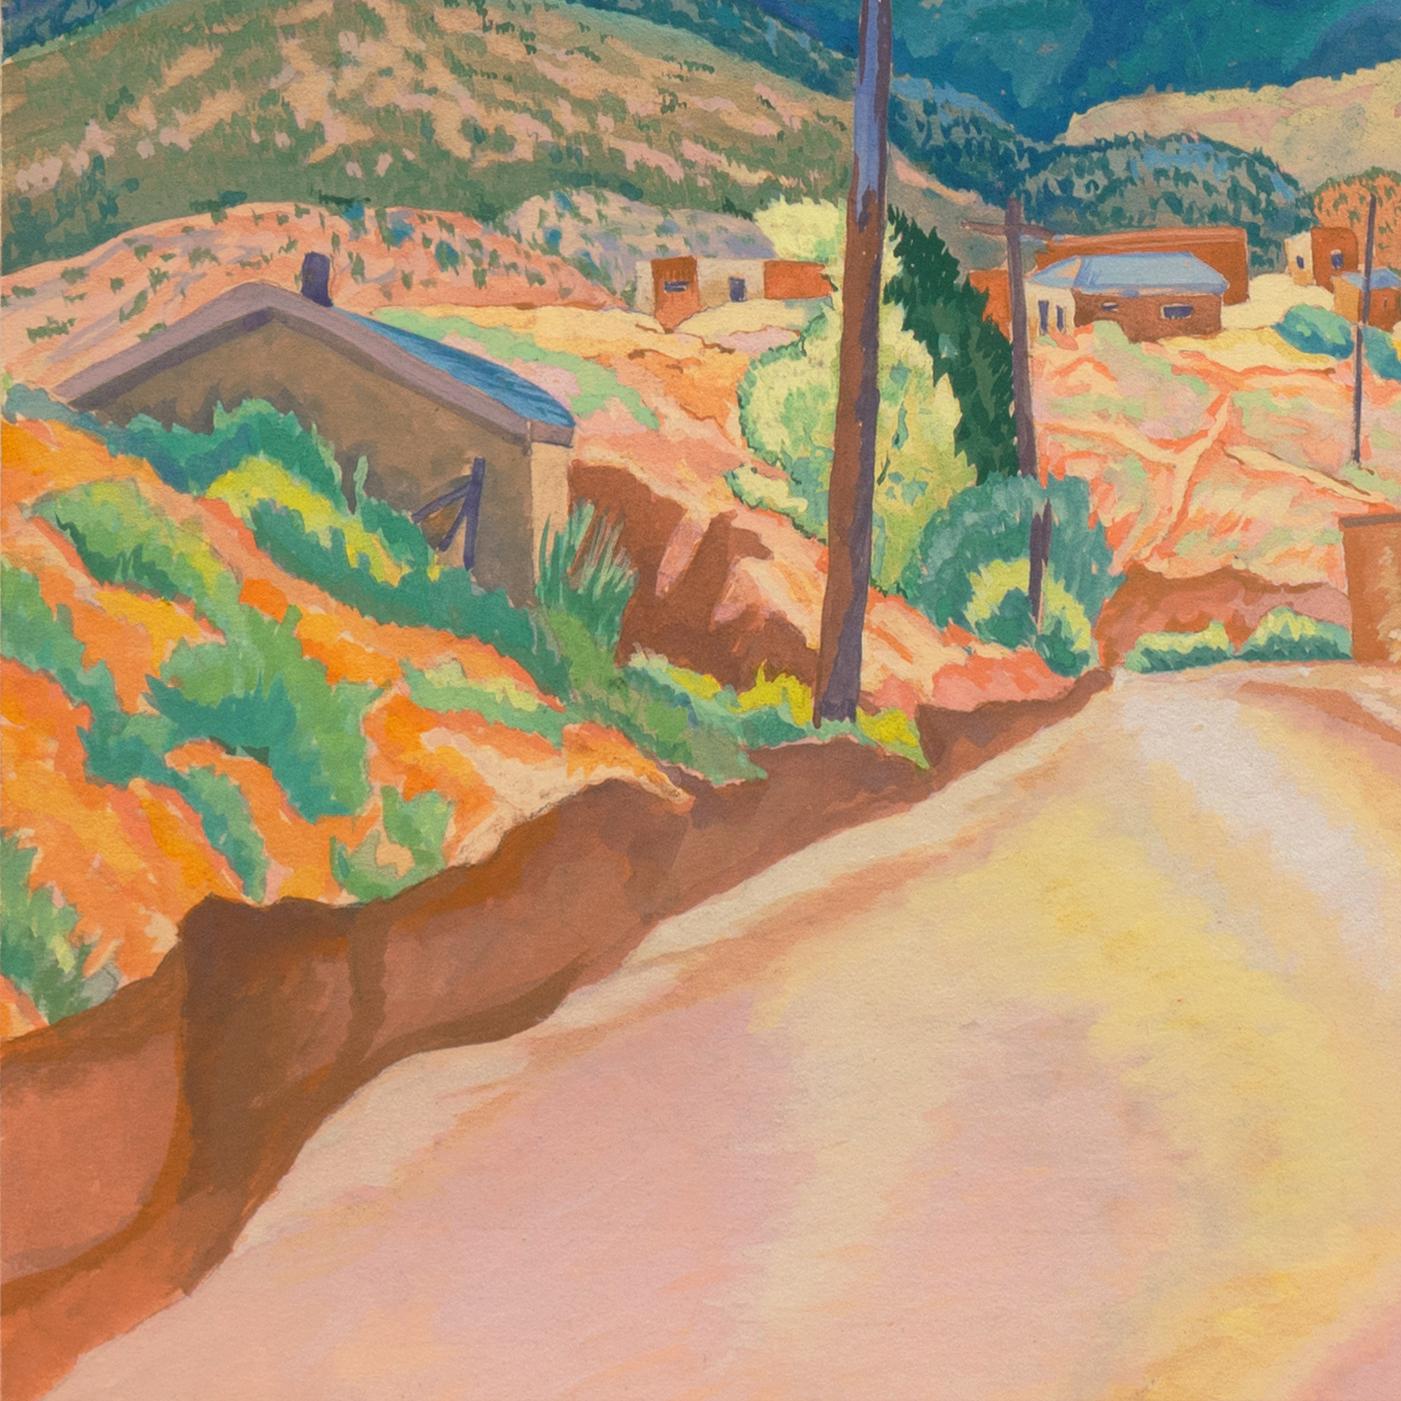 Signed 'Todros Geller' (Russian-American, 1889-1949) and dated 1937

An elegant and painterly, southwestern landscape painted when the artist was 48 years old.

Born in Vinnytsia, now in the Ukraine, Todros Geller first studied in Odessa before